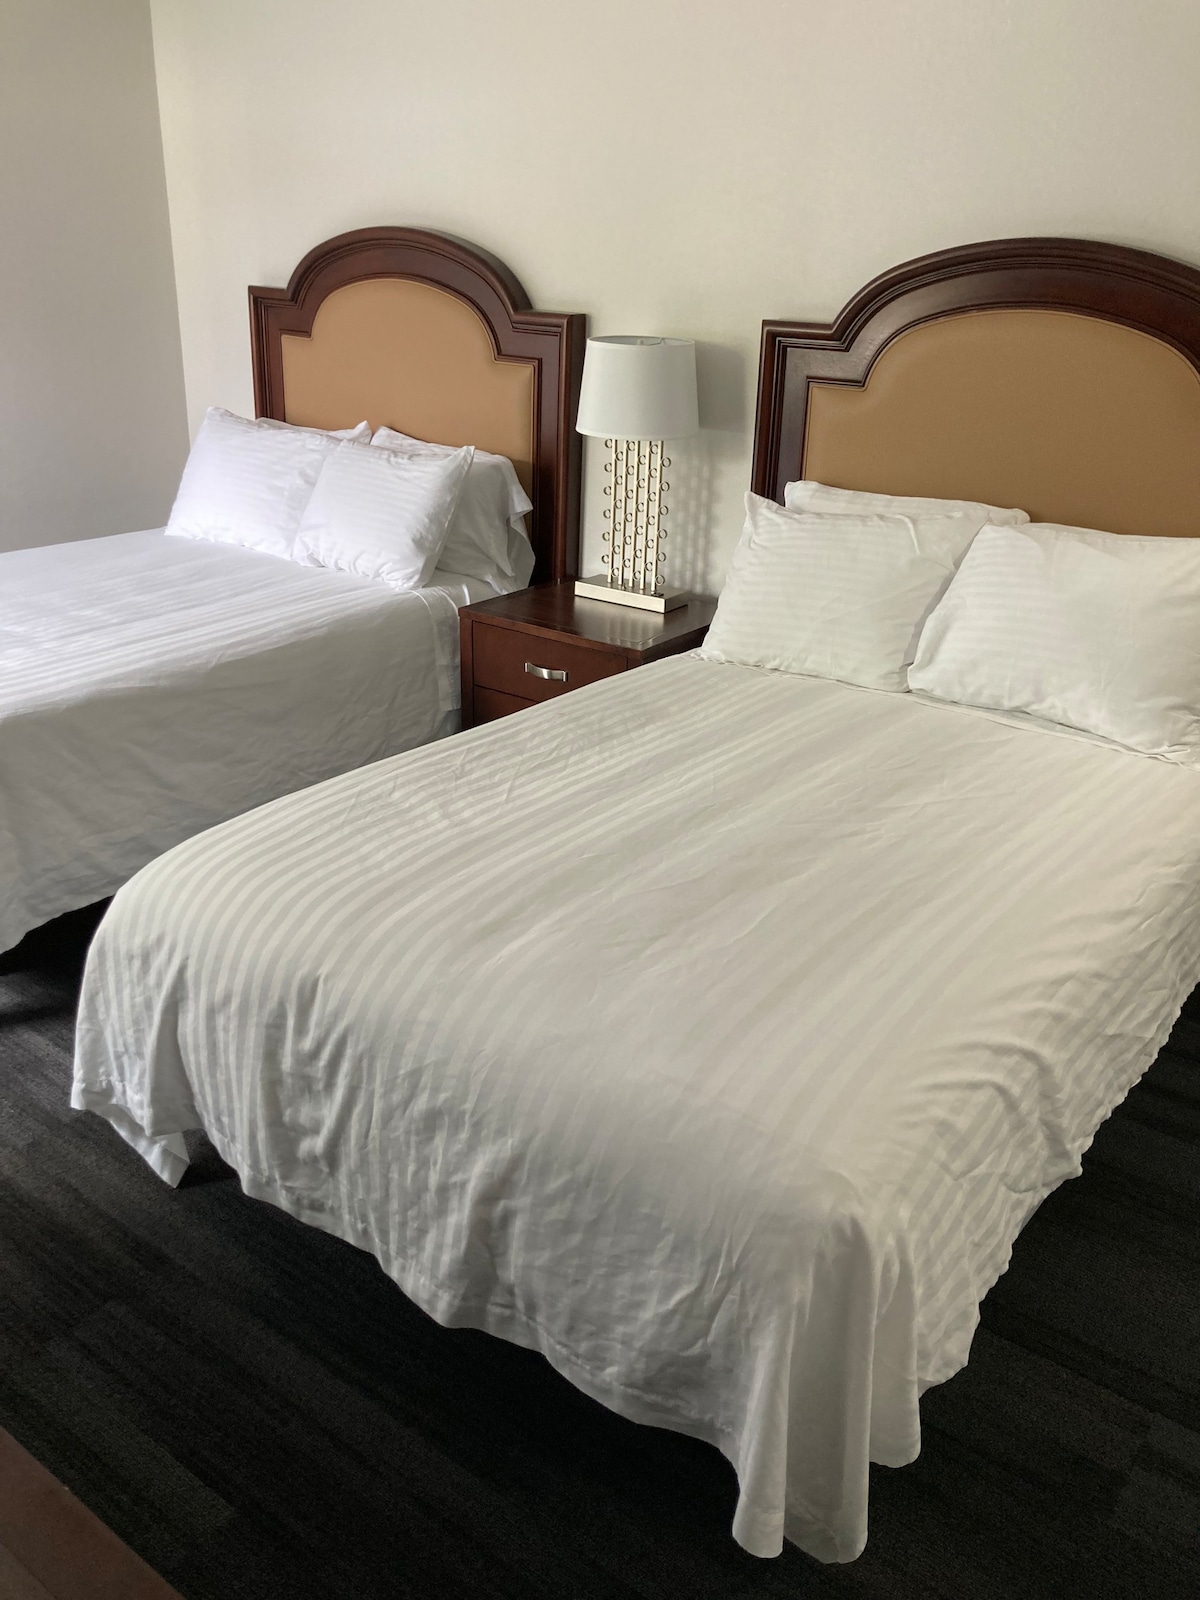 Room 210 - 2 Double Beds